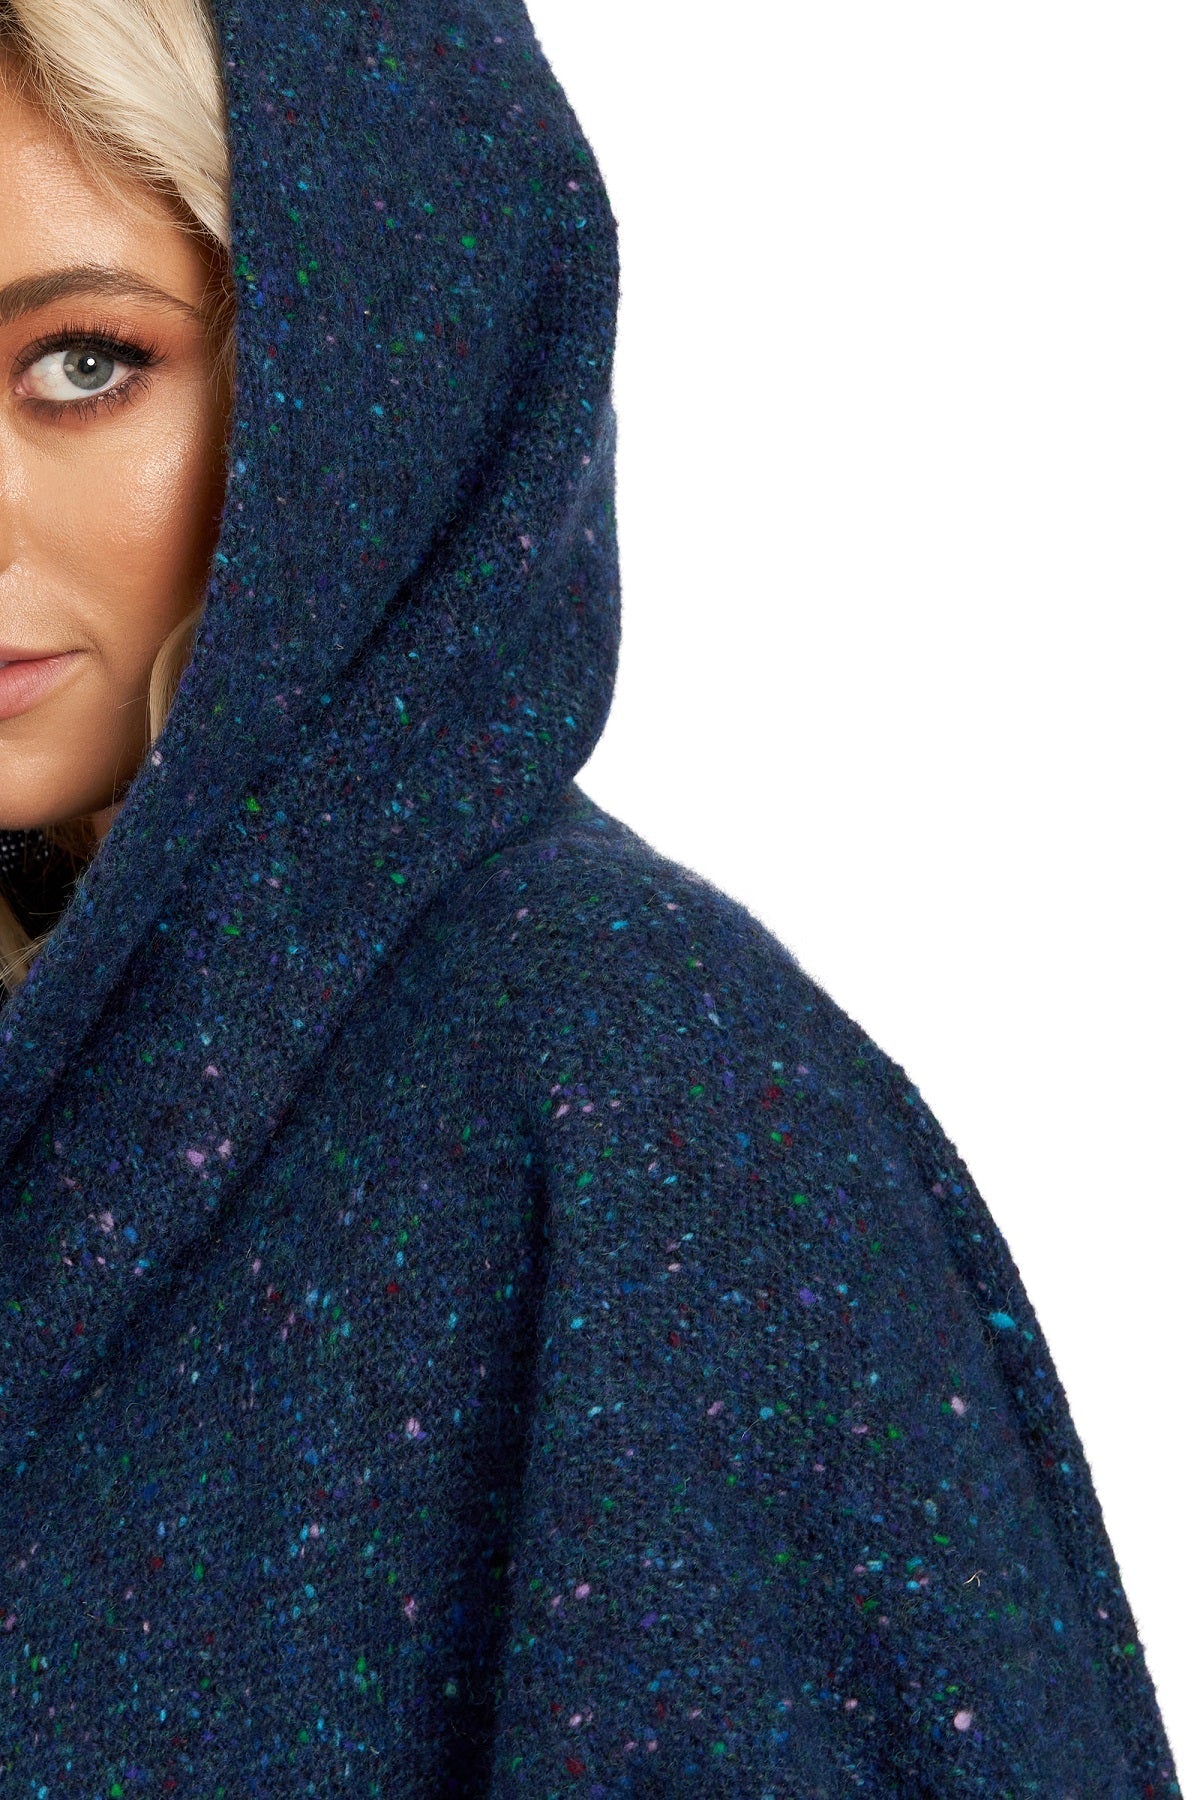 Women's Donegal Tweed Cape with Convertible Hood